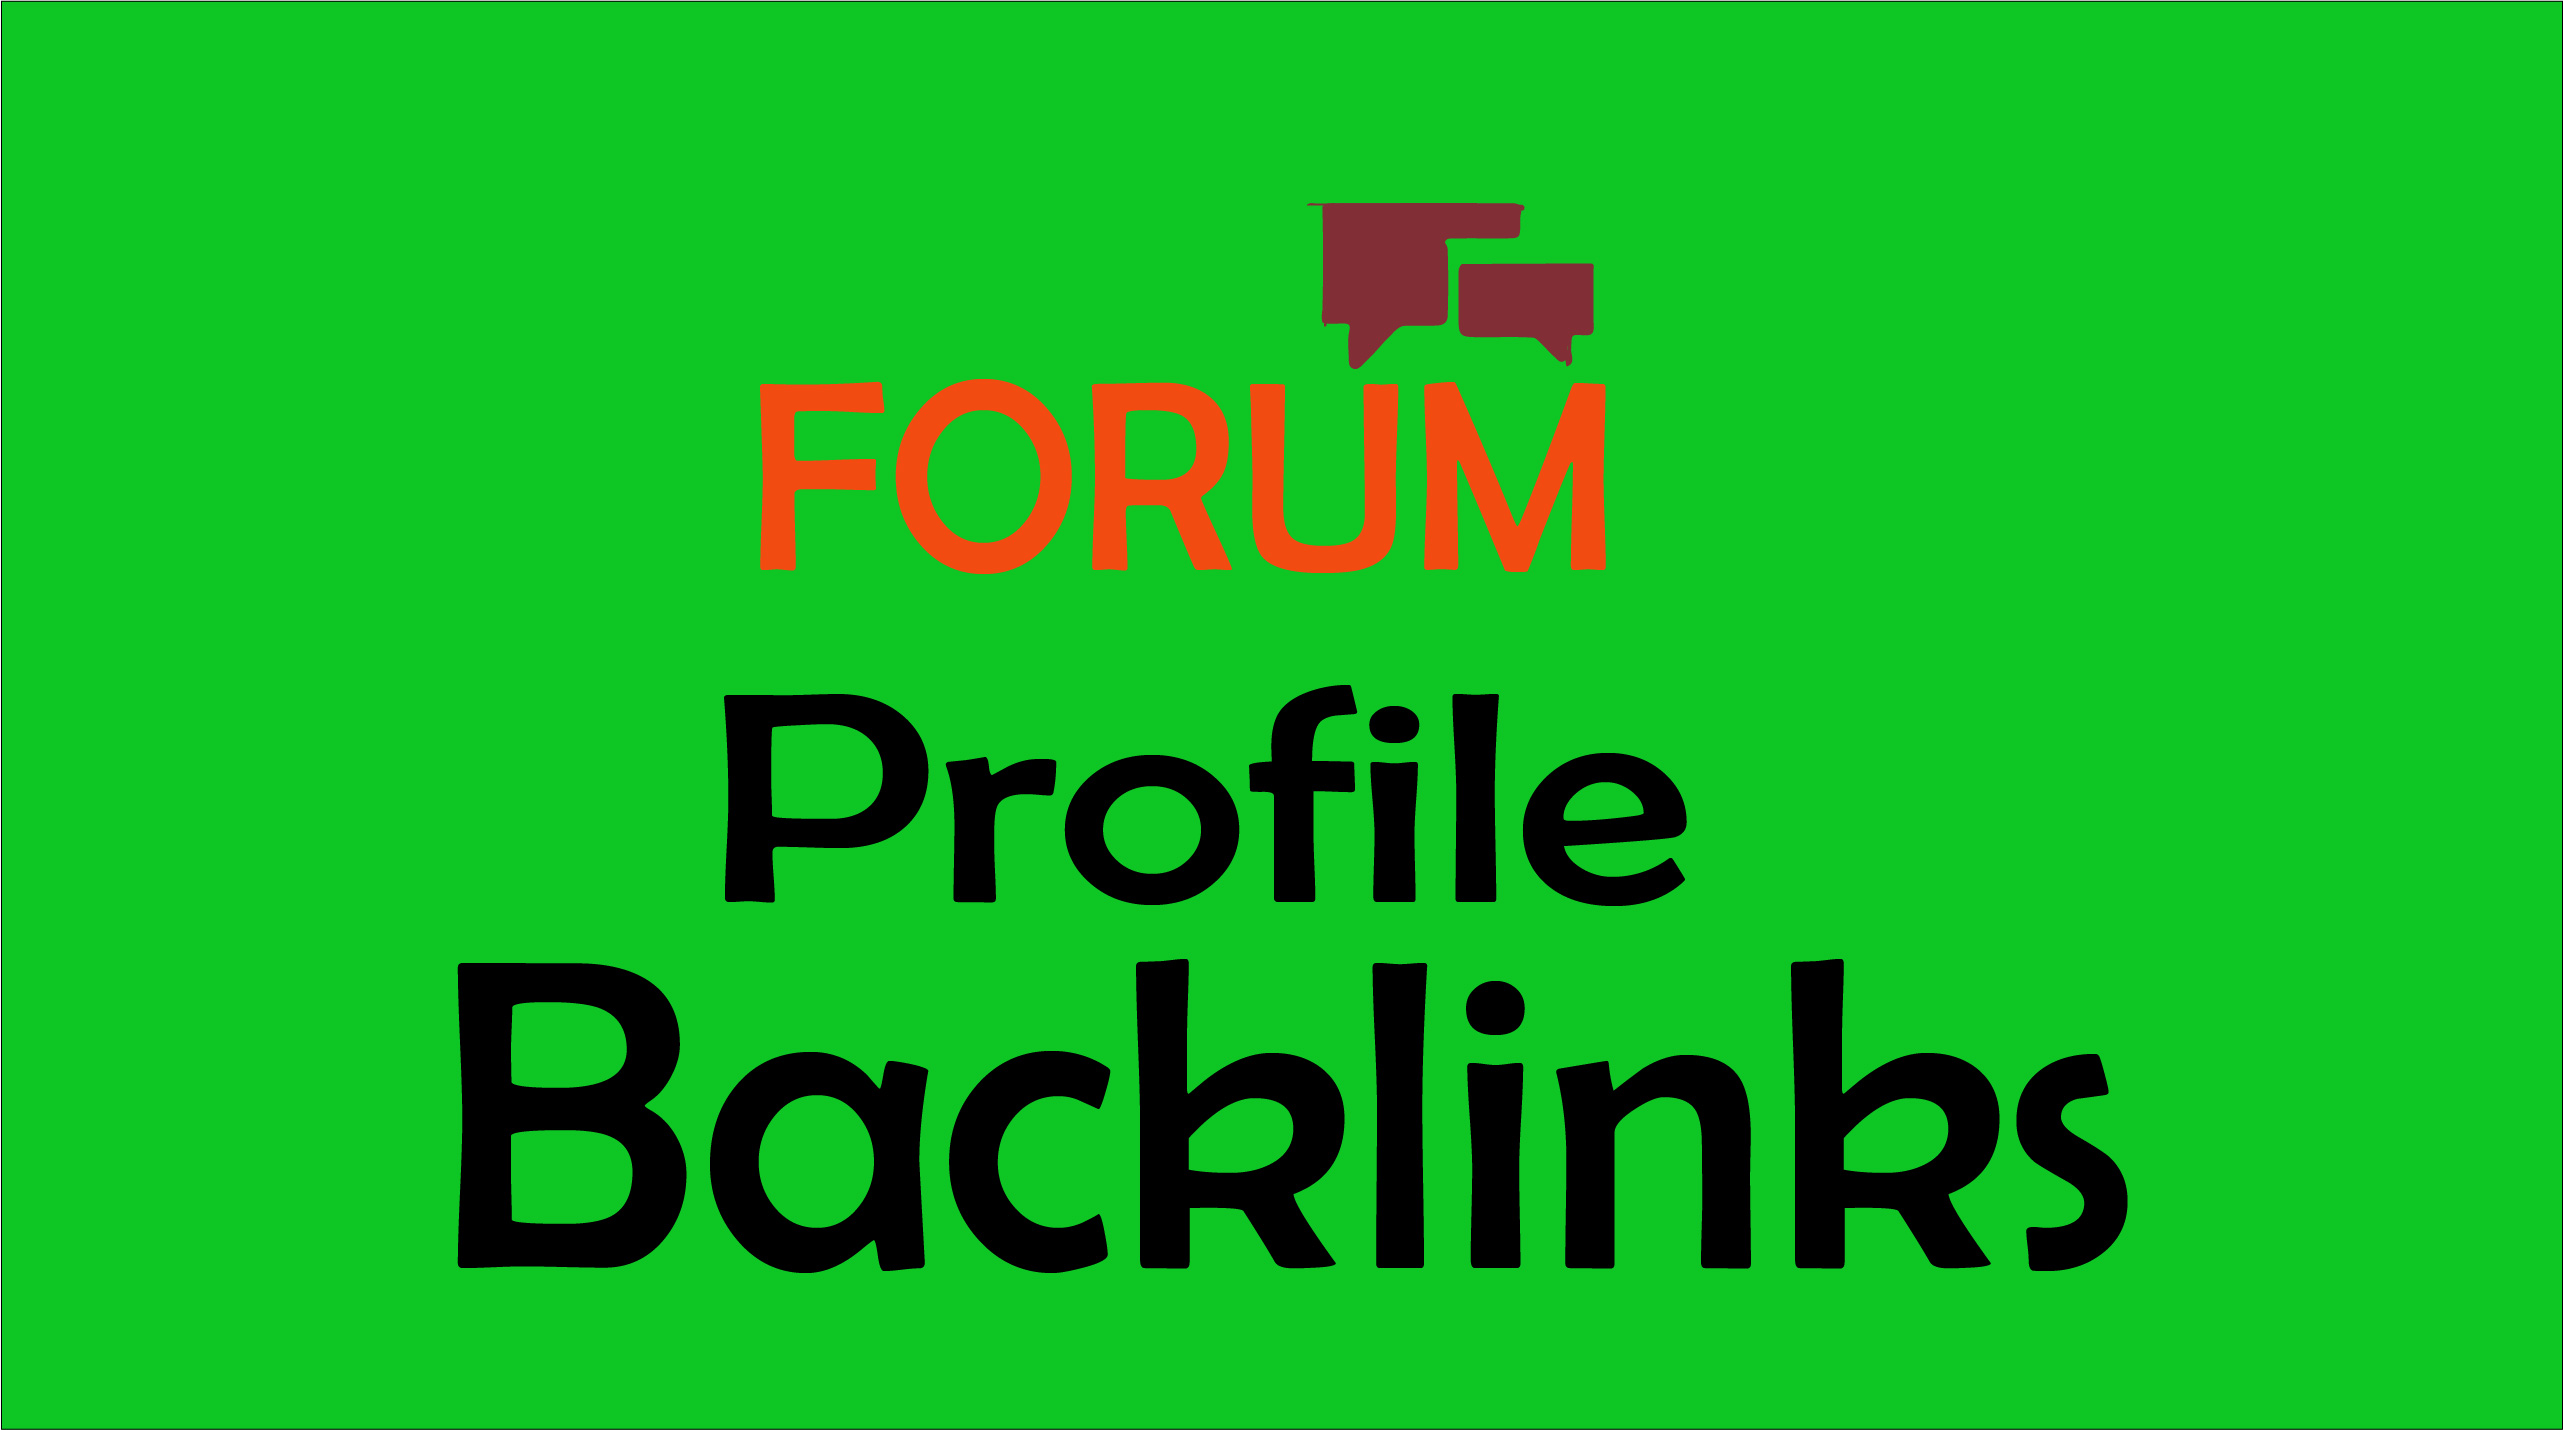 Get 500 High Quality Forum profiles backlinks for Your Site